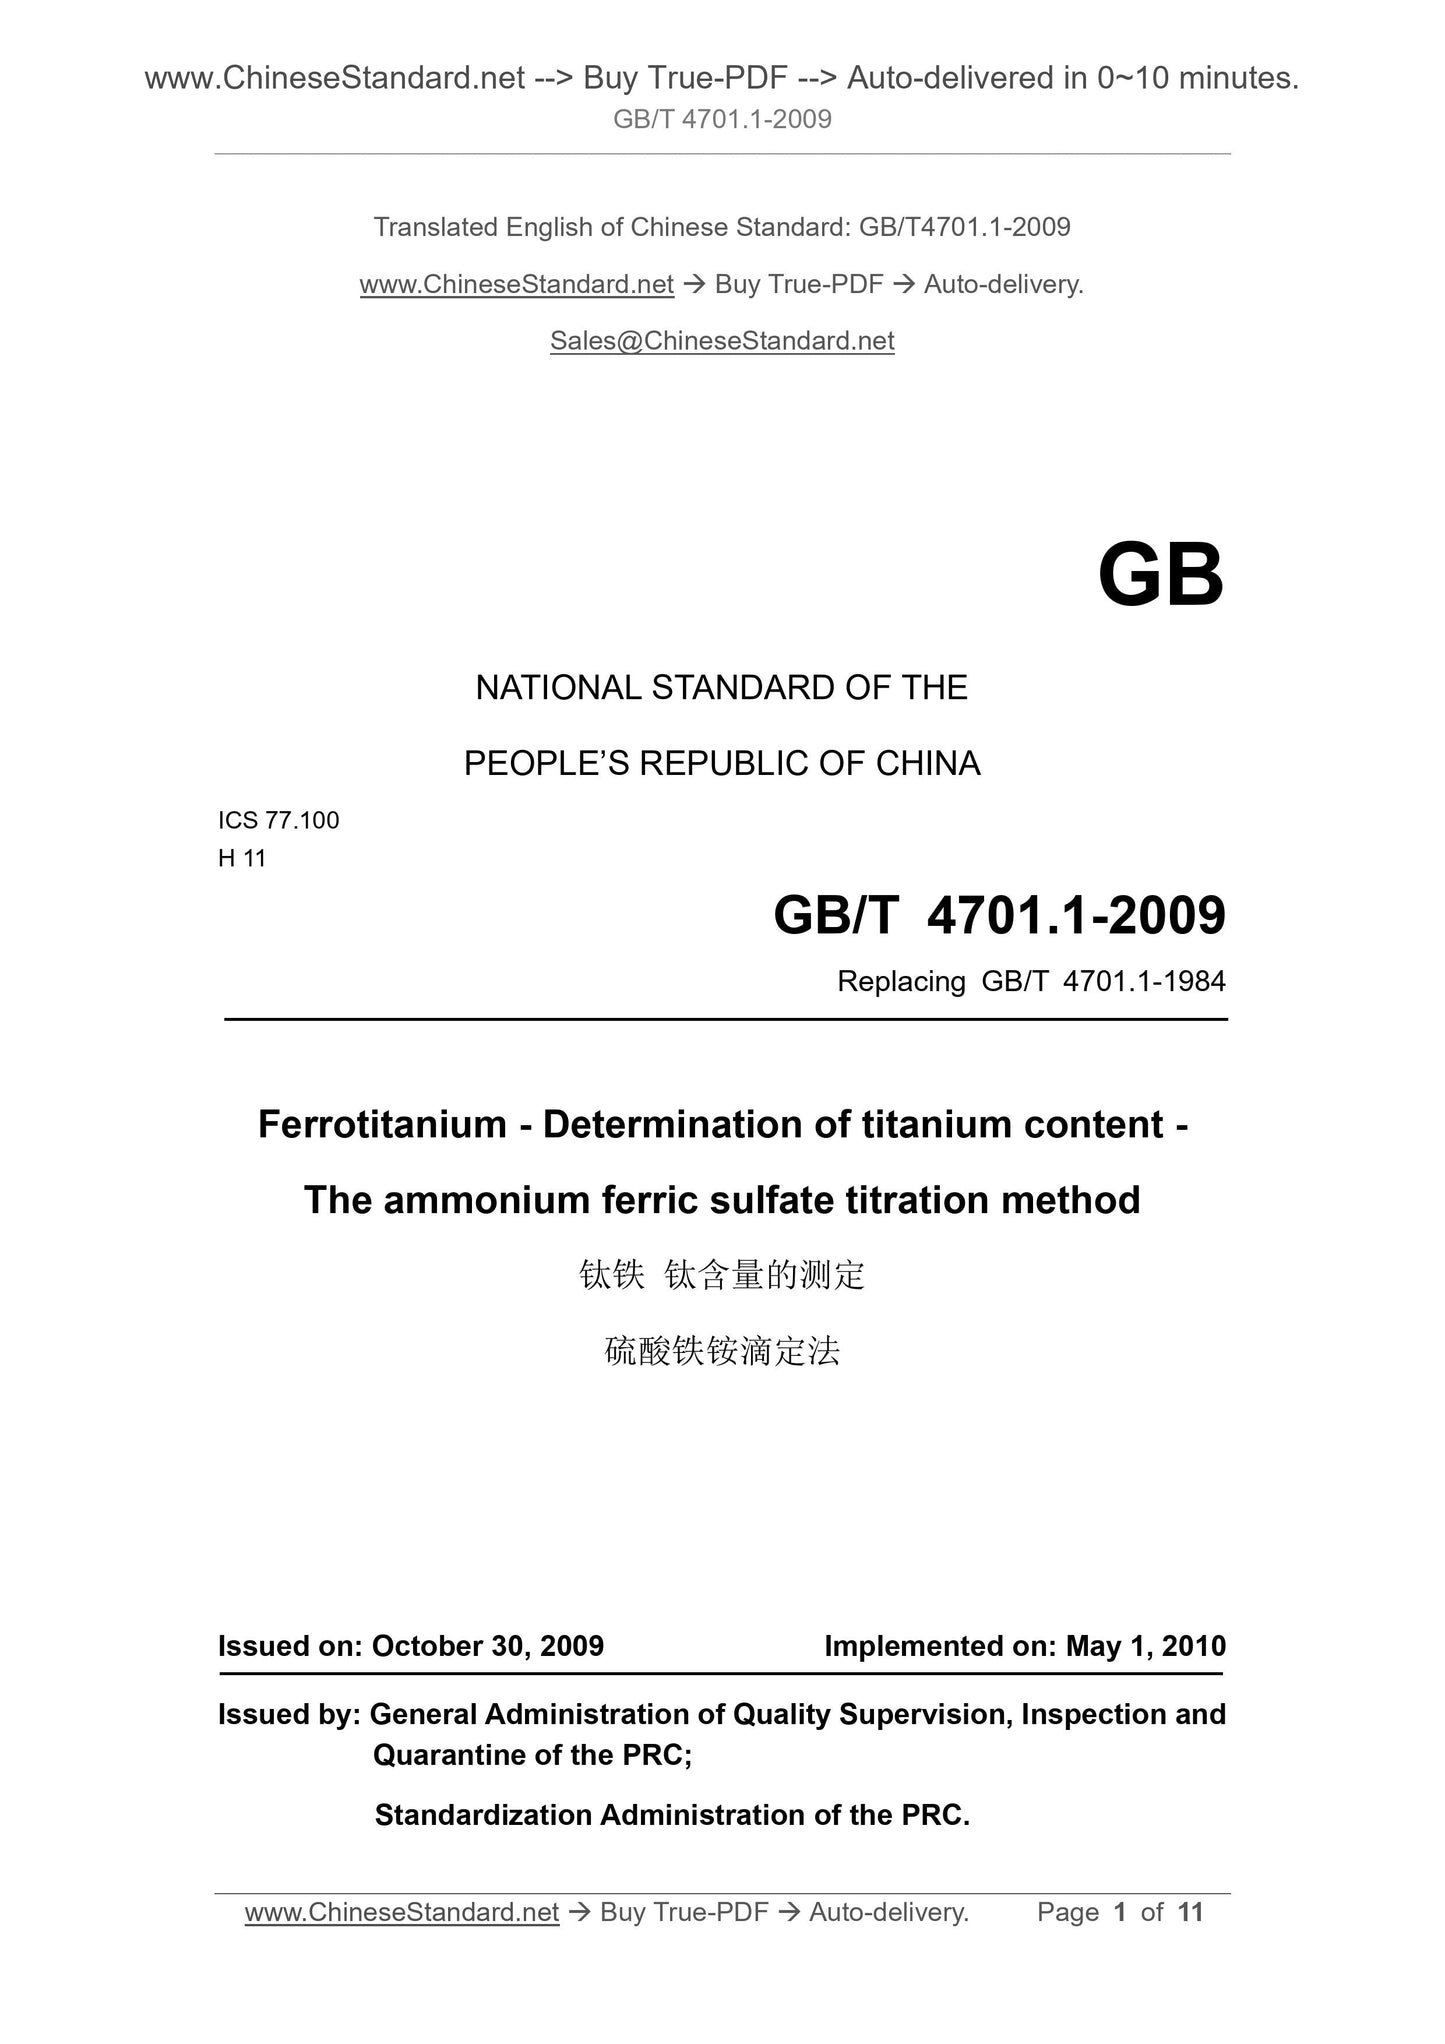 GB/T 4701.1-2009 Page 1